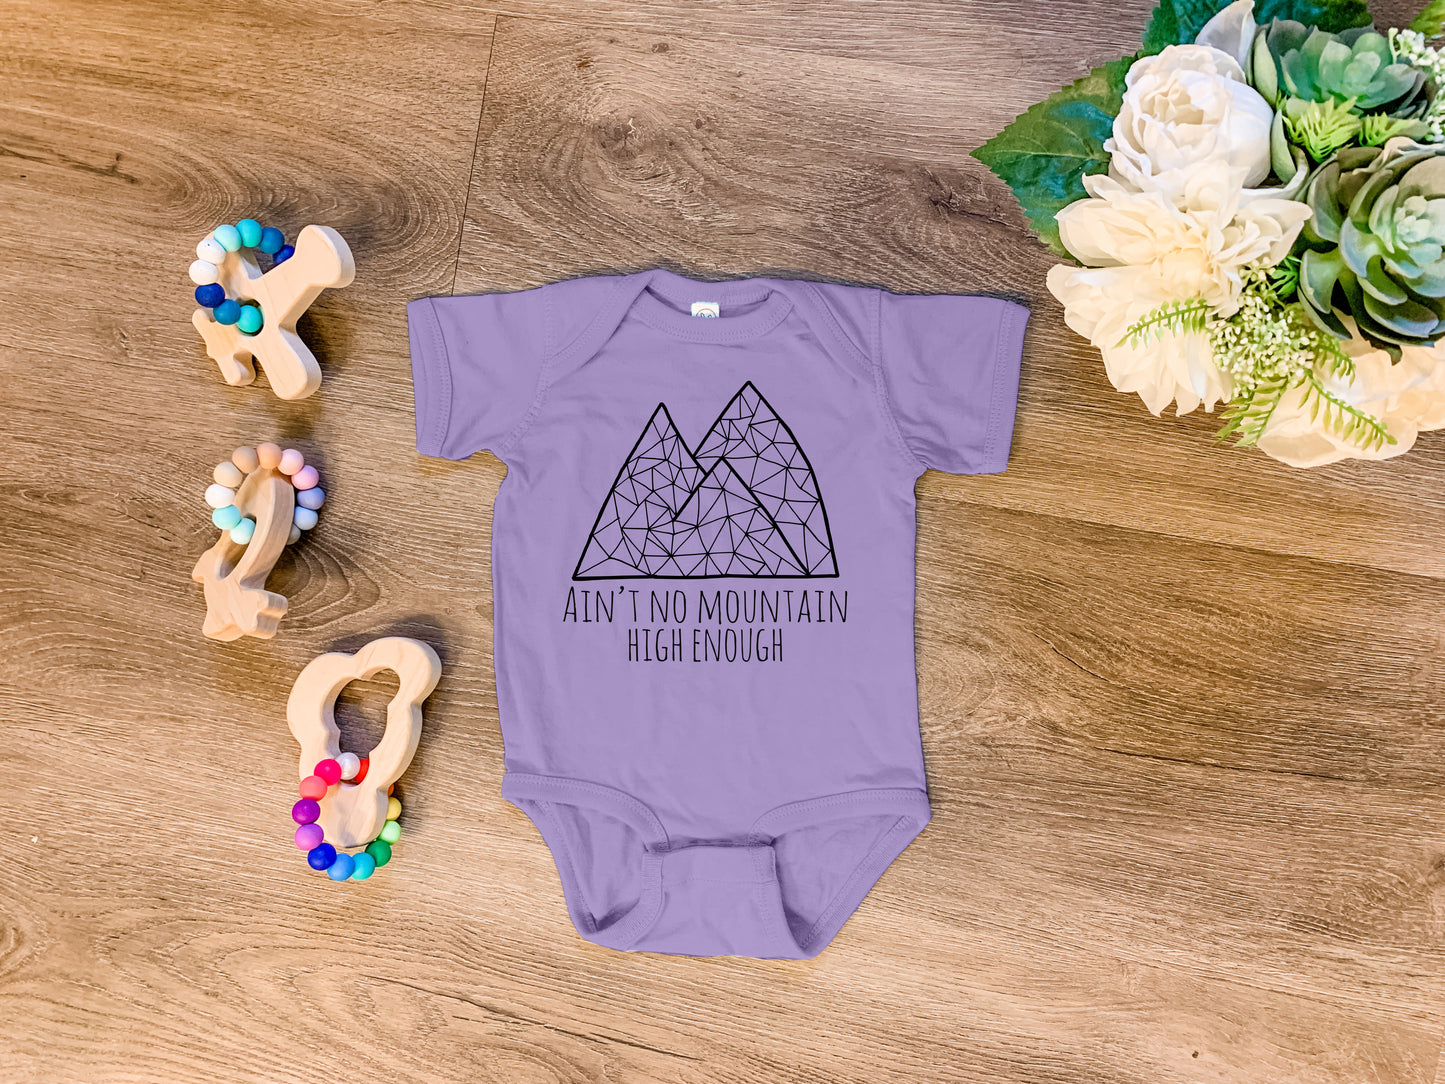 Ain't No Mountain High Enough - Onesie - Heather Gray, Chill, or Lavender